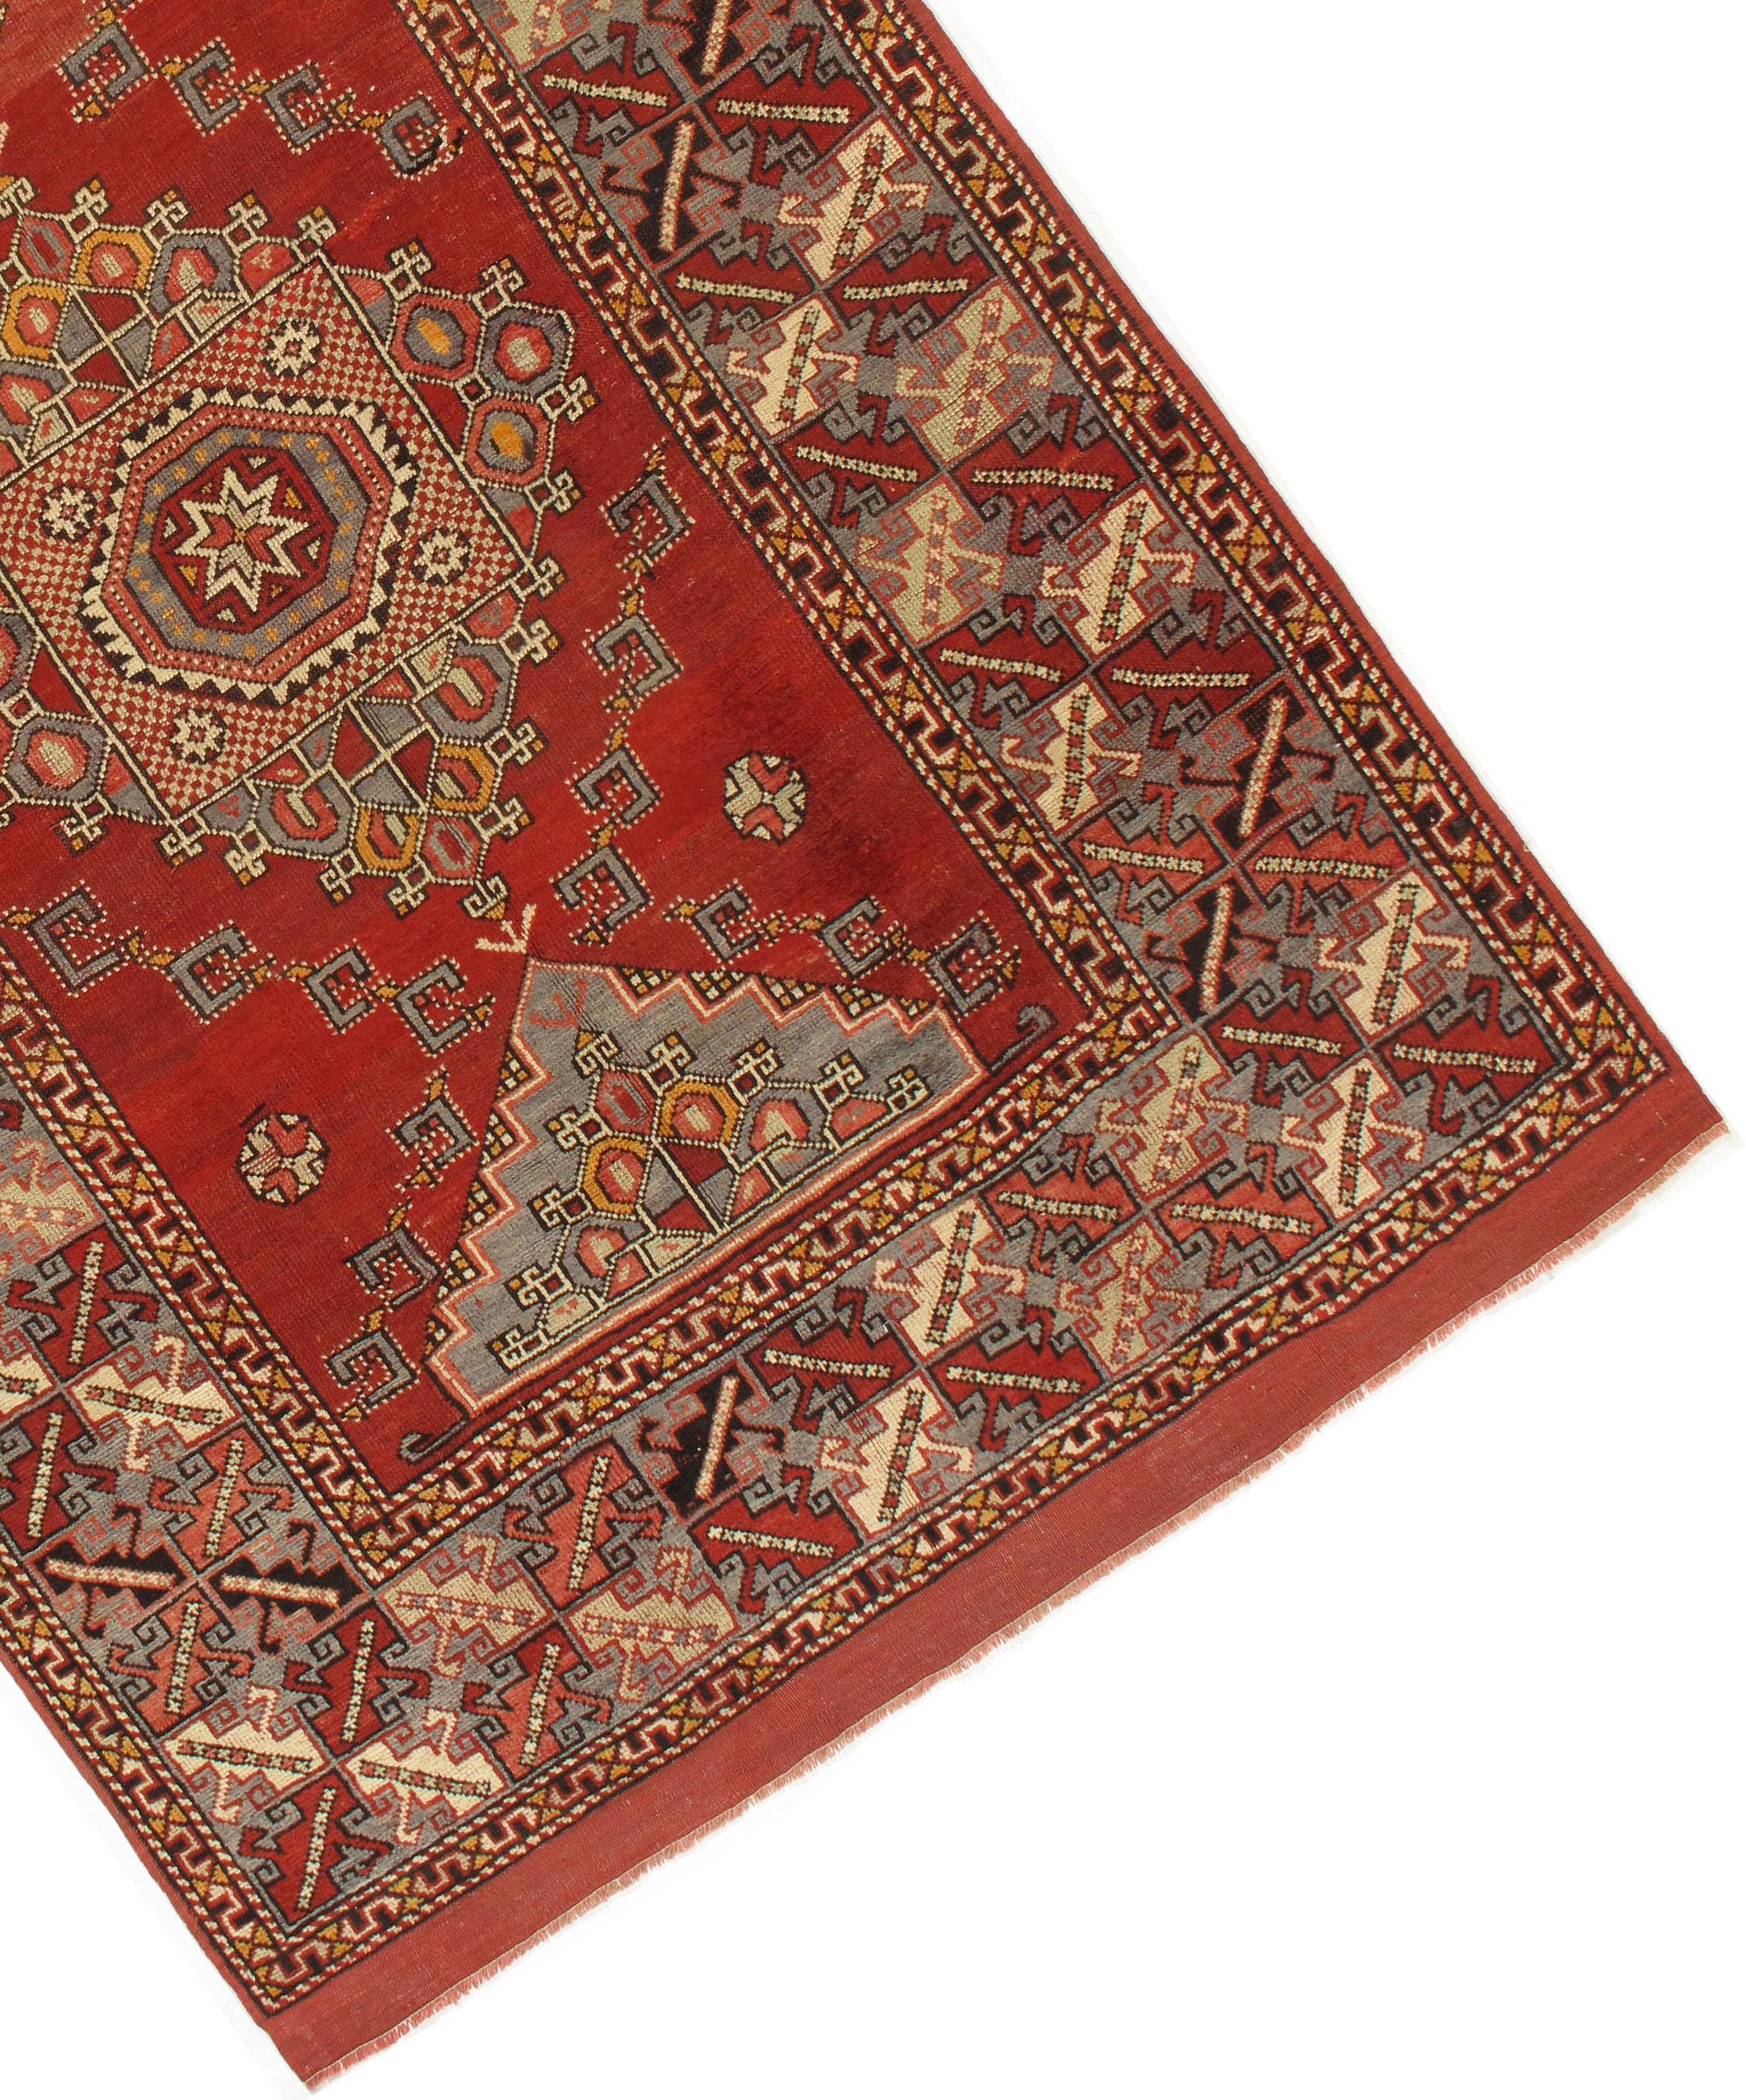 Vintage Red Turkish Oushak Rug, circa 1940, 5'5 x 8'2 In Good Condition For Sale In New York, NY